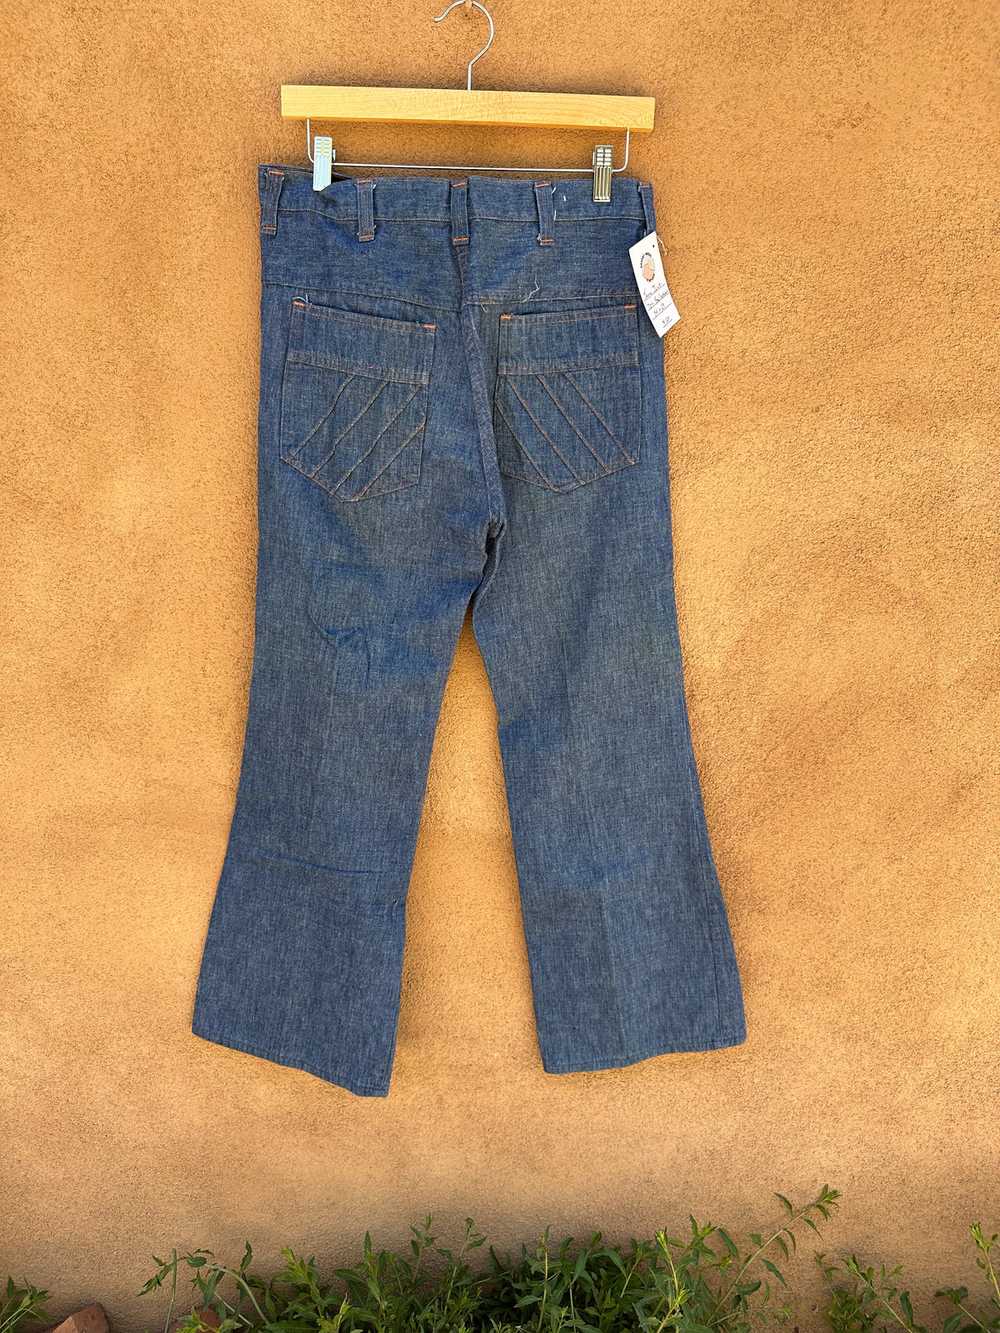 Jeans Joint 70's Bell Bottoms 34 x 29 - image 3